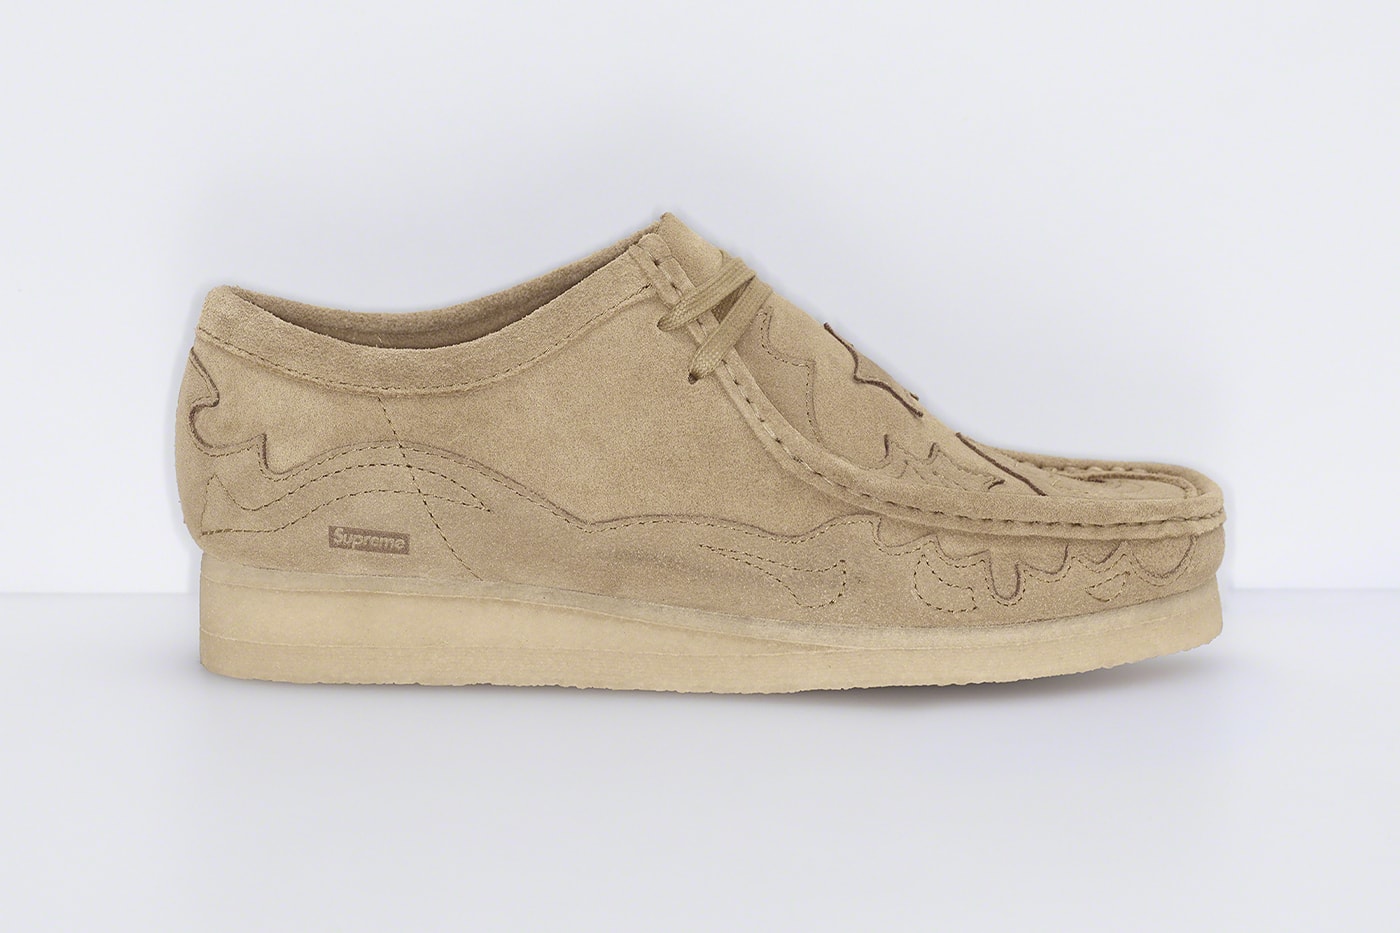 clarks supreme wallabees collaboration shoes suede